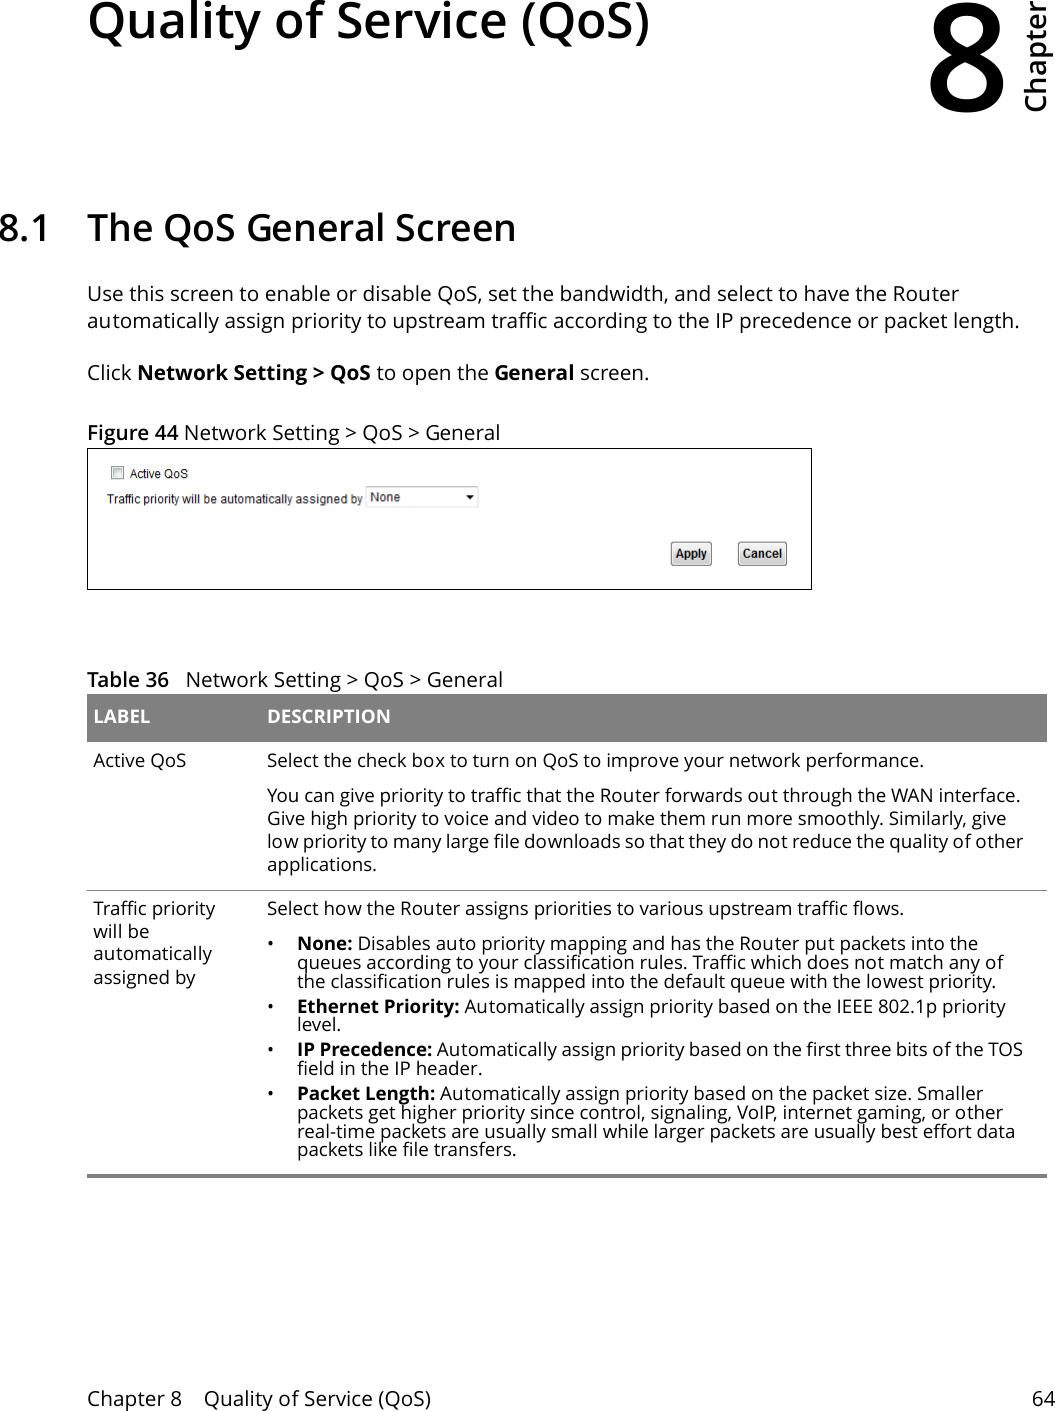 8Chapter Chapter 8    Quality of Service (QoS) 64CHAPTER 8 Chapter 8 Quality of Service (QoS)8.1   The QoS General Screen Use this screen to enable or disable QoS, set the bandwidth, and select to have the Router automatically assign priority to upstream traffic according to the IP precedence or packet length.Click Network Setting &gt; QoS to open the General screen.  Figure 44 Network Setting &gt; QoS &gt; General Table 36   Network Setting &gt; QoS &gt; General LABEL DESCRIPTIONActive QoS Select the check box to turn on QoS to improve your network performance. You can give priority to traffic that the Router forwards out through the WAN interface. Give high priority to voice and video to make them run more smoothly. Similarly, give low priority to many large file downloads so that they do not reduce the quality of other applications. Traffic priority will be automatically assigned bySelect how the Router assigns priorities to various upstream traffic flows.•None: Disables auto priority mapping and has the Router put packets into the queues according to your classification rules. Traffic which does not match any of the classification rules is mapped into the default queue with the lowest priority.•Ethernet Priority: Automatically assign priority based on the IEEE 802.1p priority level.•IP Precedence: Automatically assign priority based on the first three bits of the TOS field in the IP header.•Packet Length: Automatically assign priority based on the packet size. Smaller packets get higher priority since control, signaling, VoIP, internet gaming, or other real-time packets are usually small while larger packets are usually best effort data packets like file transfers.